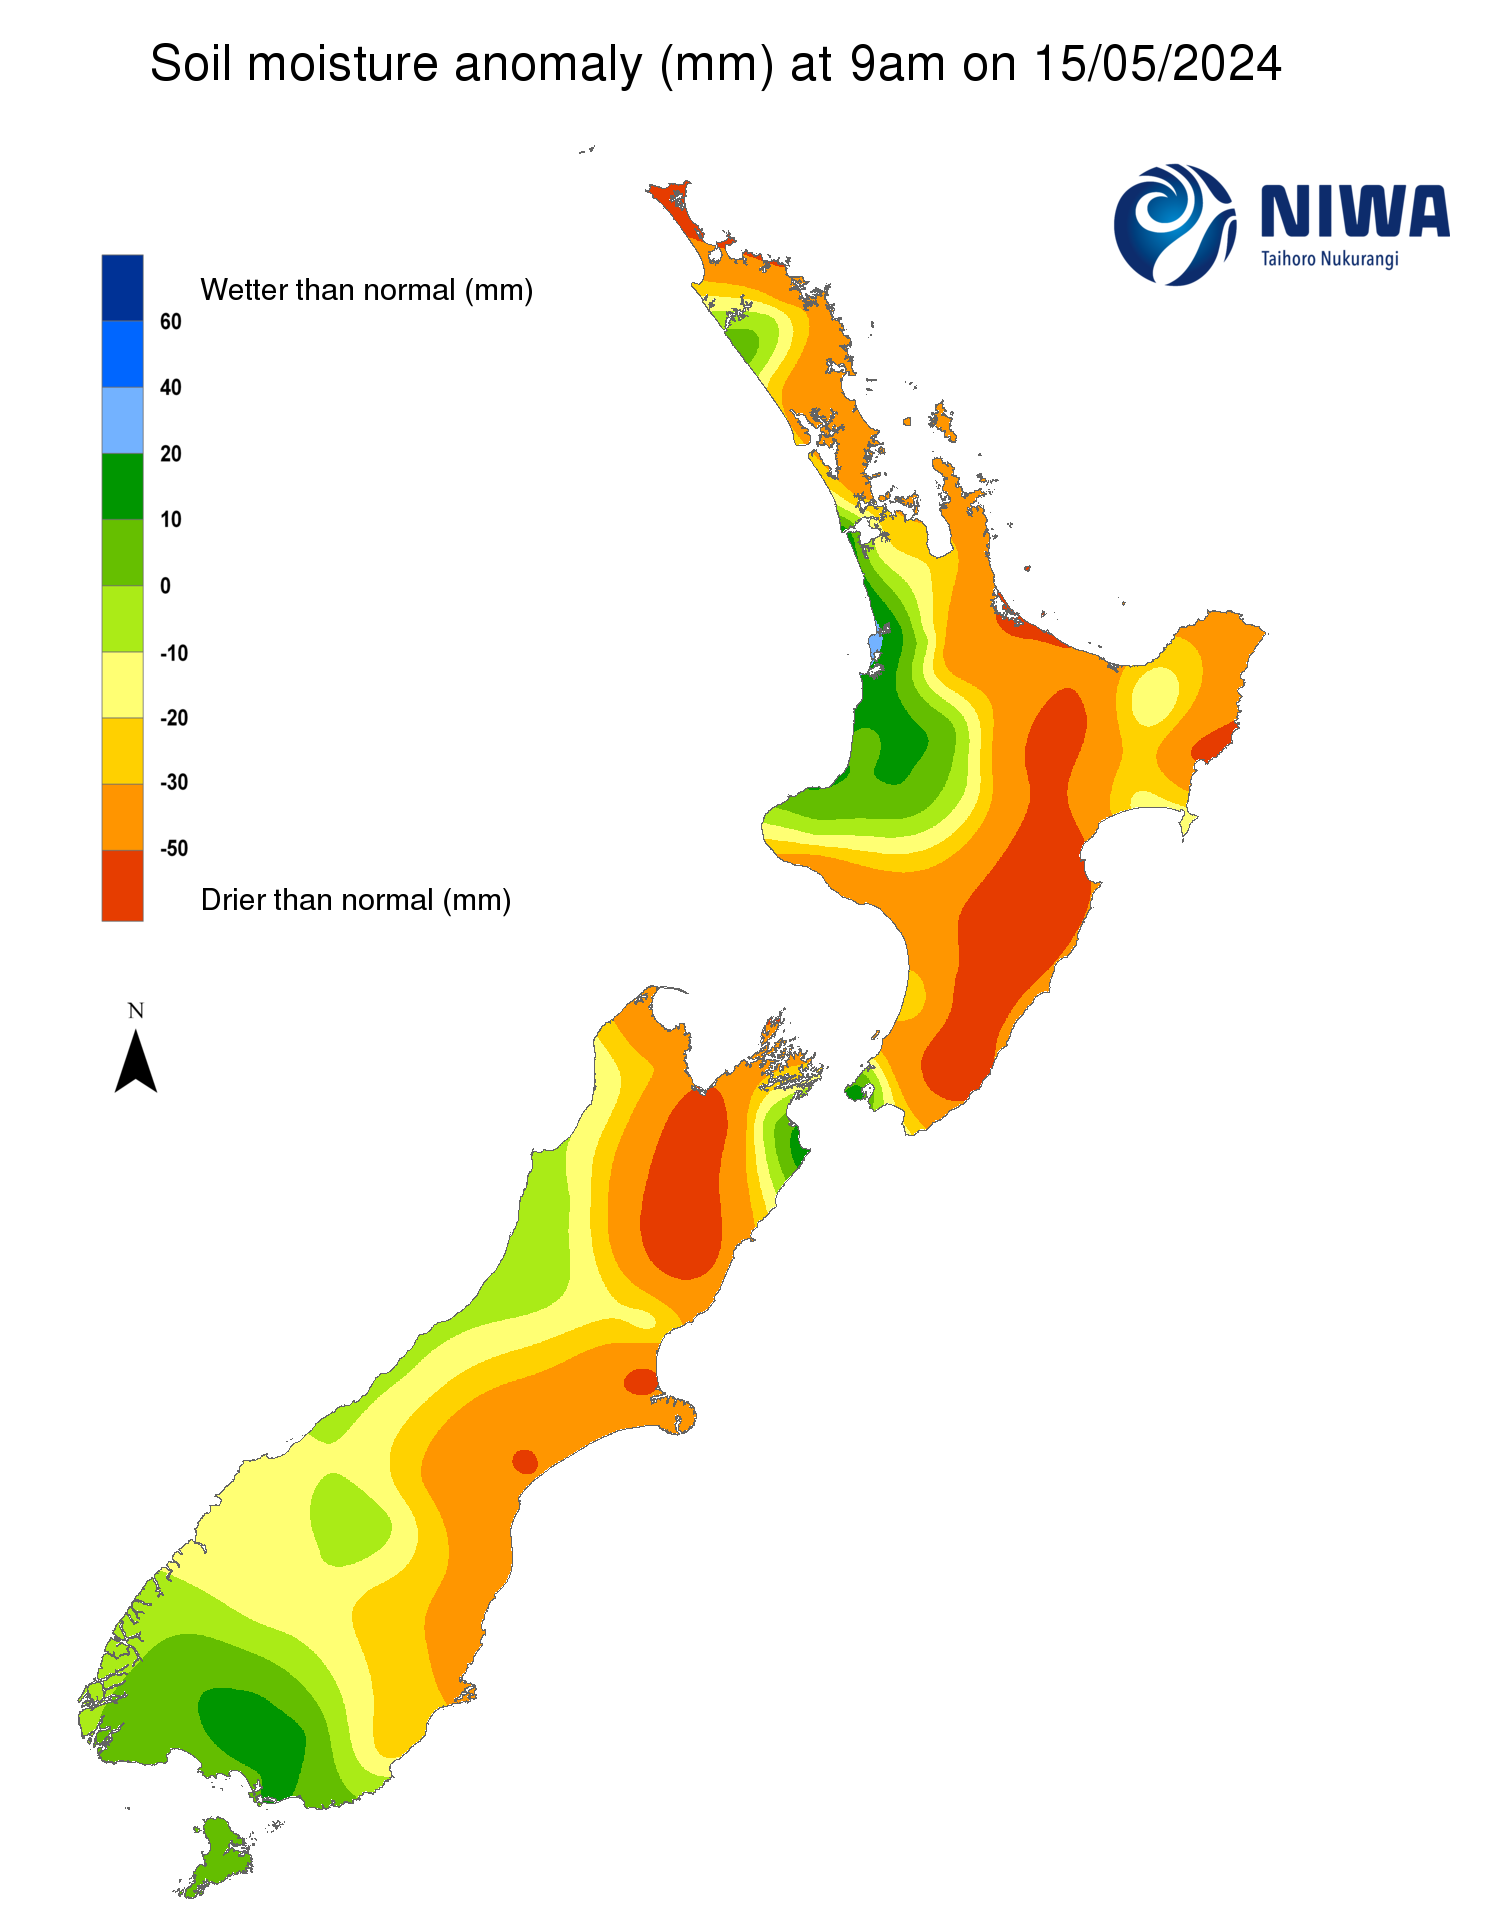 Soil moisture anomaly map (mm) at 9am on 15 May 2015